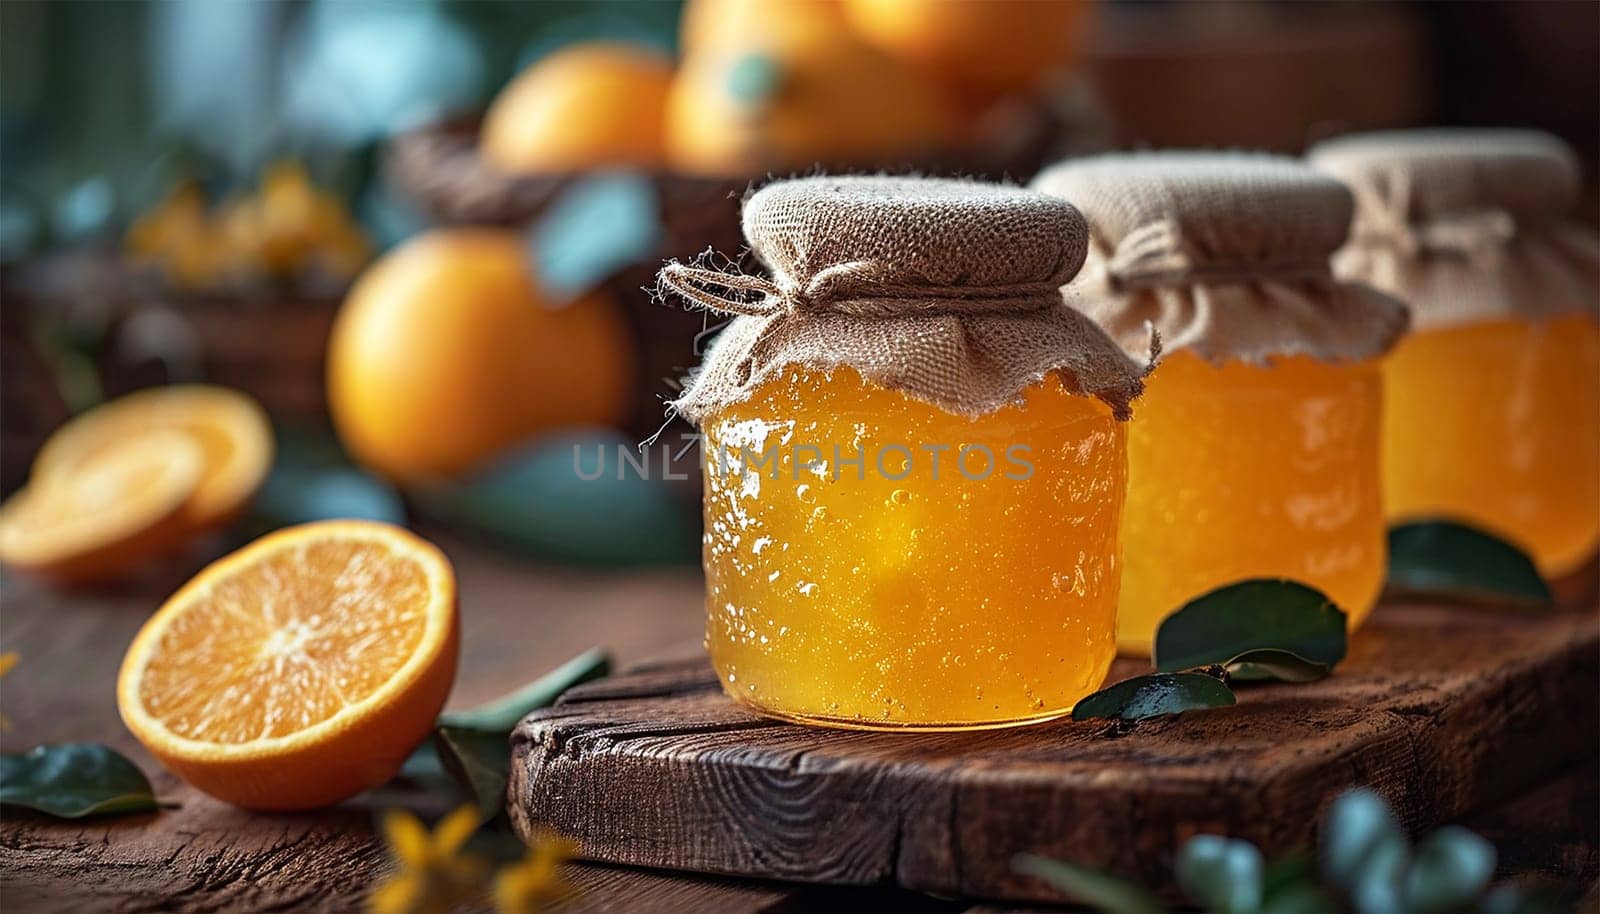 Homemade orange marmalade on wooden table. Seville Orange, Sour Orange, Bitter Orange, Marmalade Orange - native Southeast Asia tropical fruit. Homemade Tasty Jam on white background. Healthy Food. by Annebel146